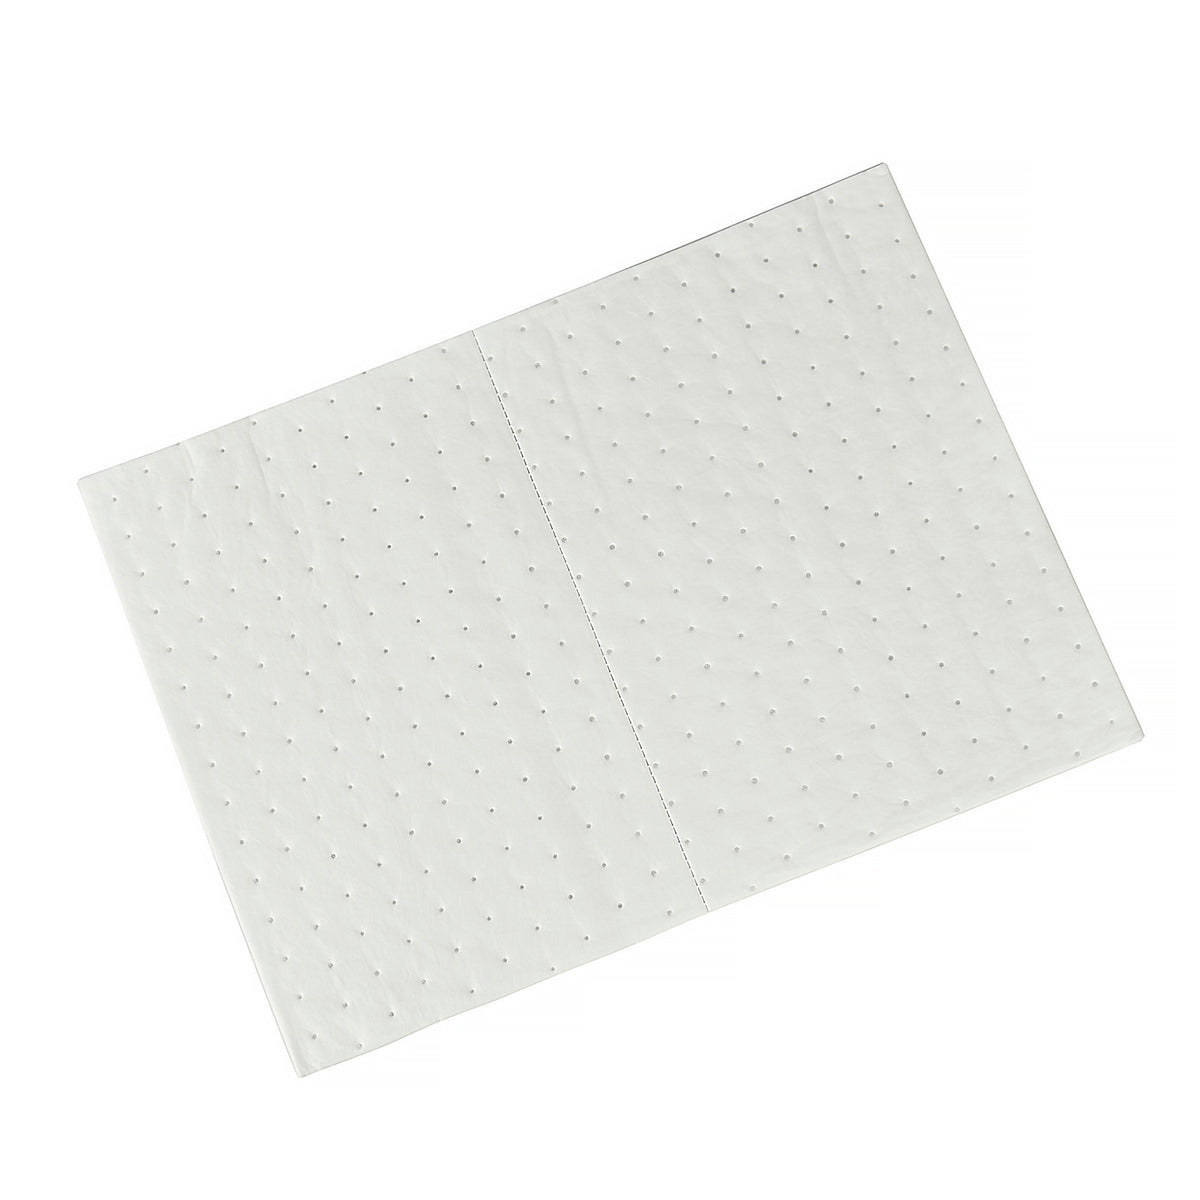 Oil Absorber Pads  Decalin Chemicals : Decalin Chemicals